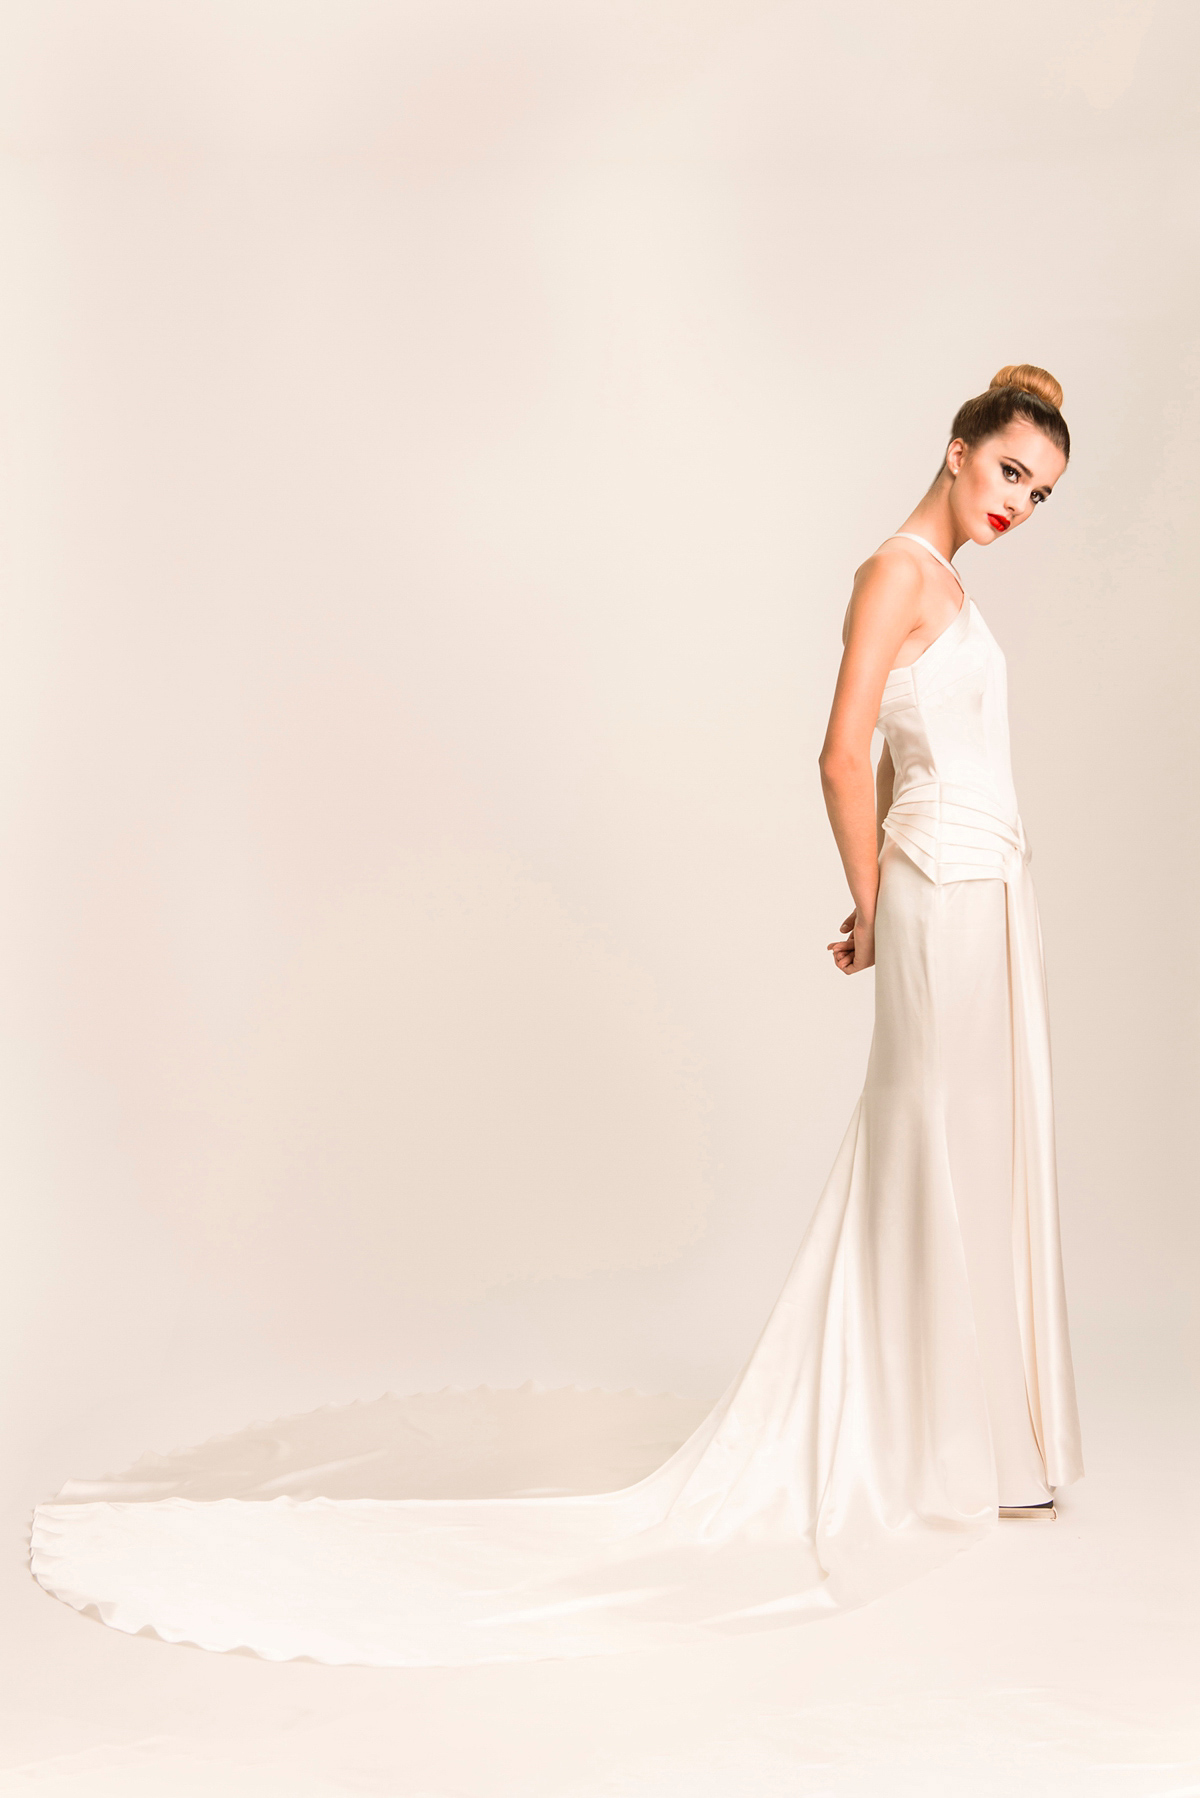 Adelais London offer a small collection of vintage Hollywood glamour inspired bridal fashion for the modern bride.